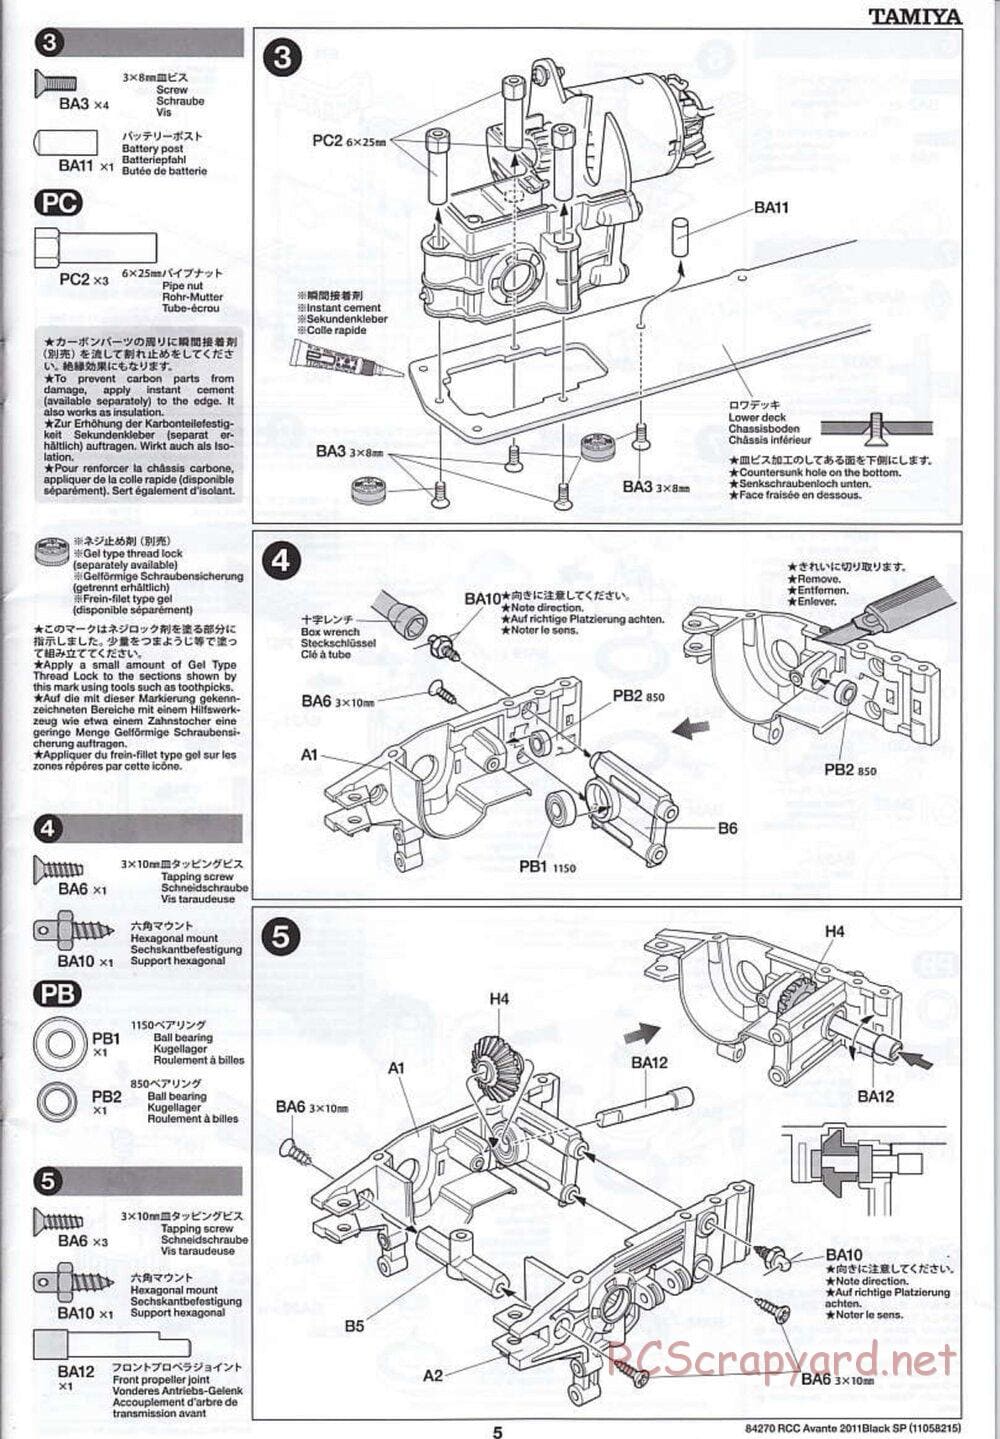 Tamiya - Avante 2011 - Black Special Chassis - Manual - Page 5